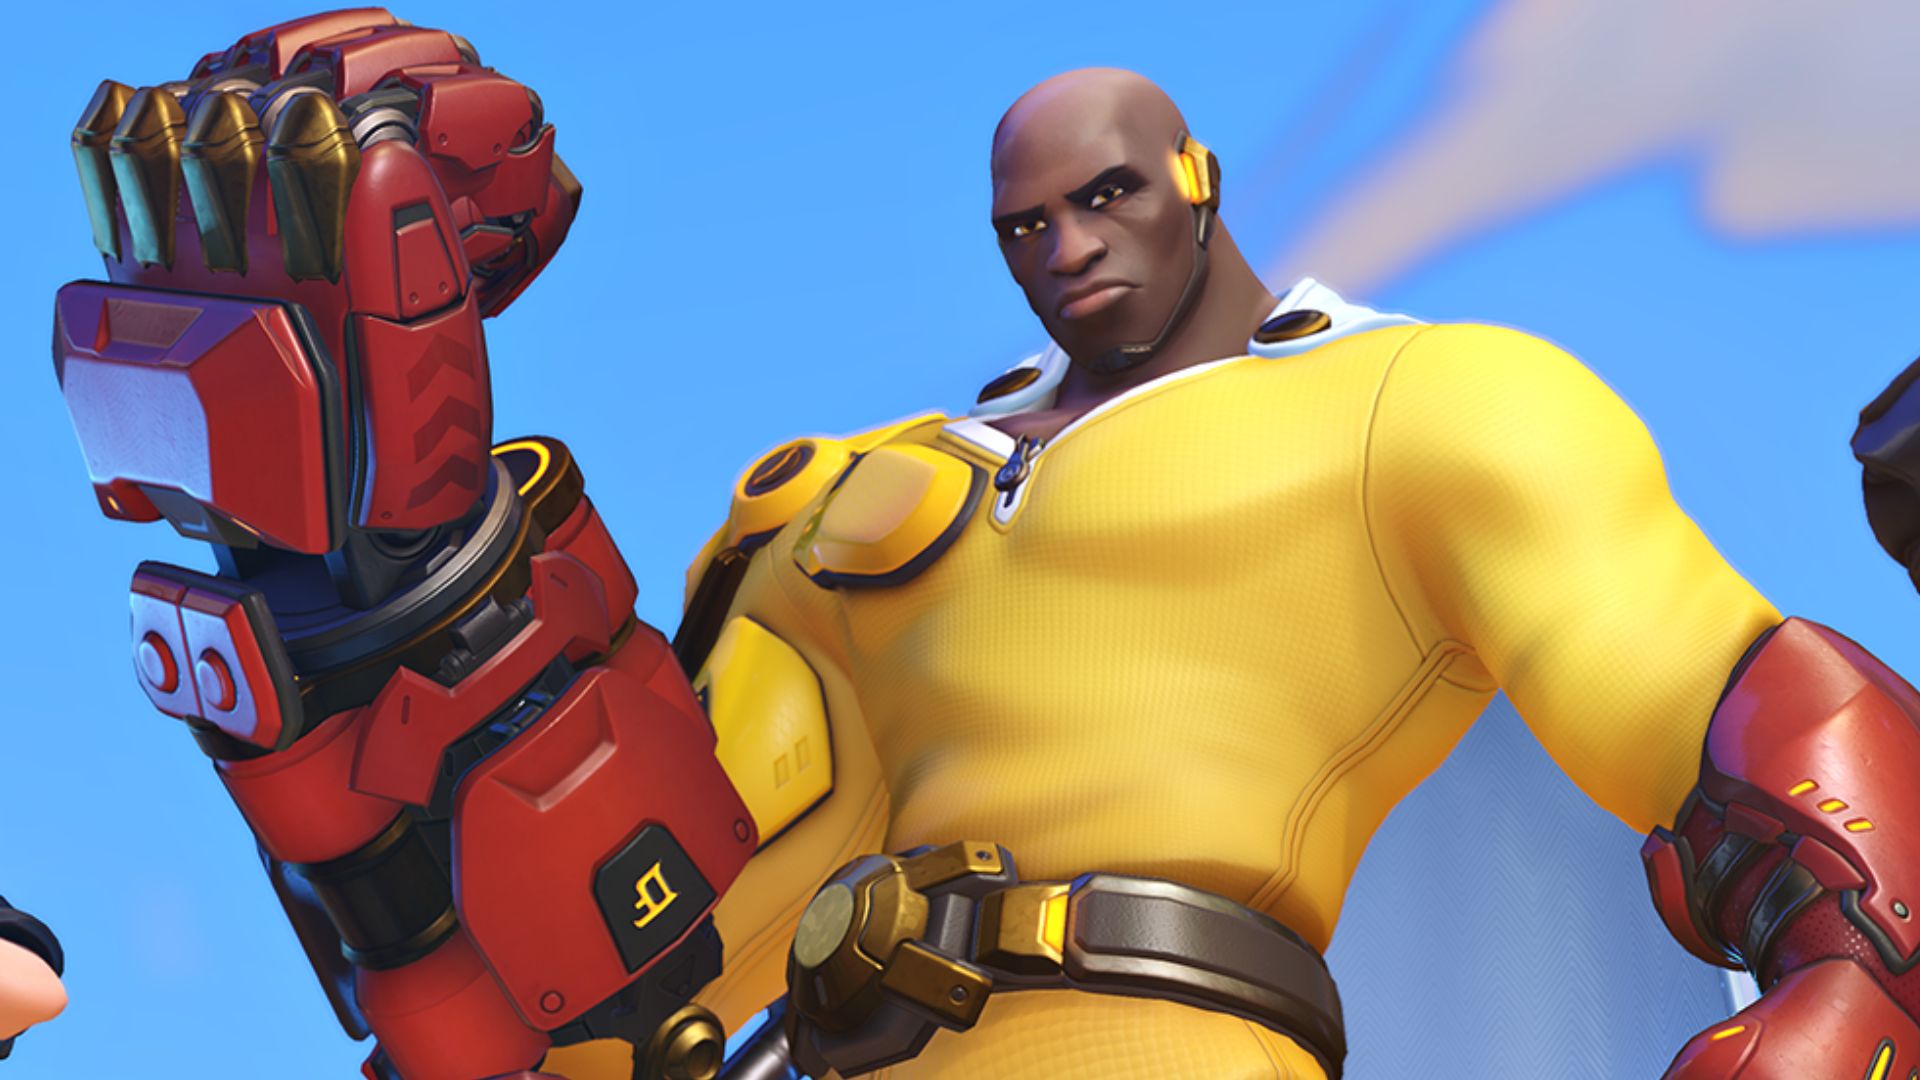 Overwatch 2 One-Punch Man crossover revealed alongside new skins and events  in Season 3 trailer